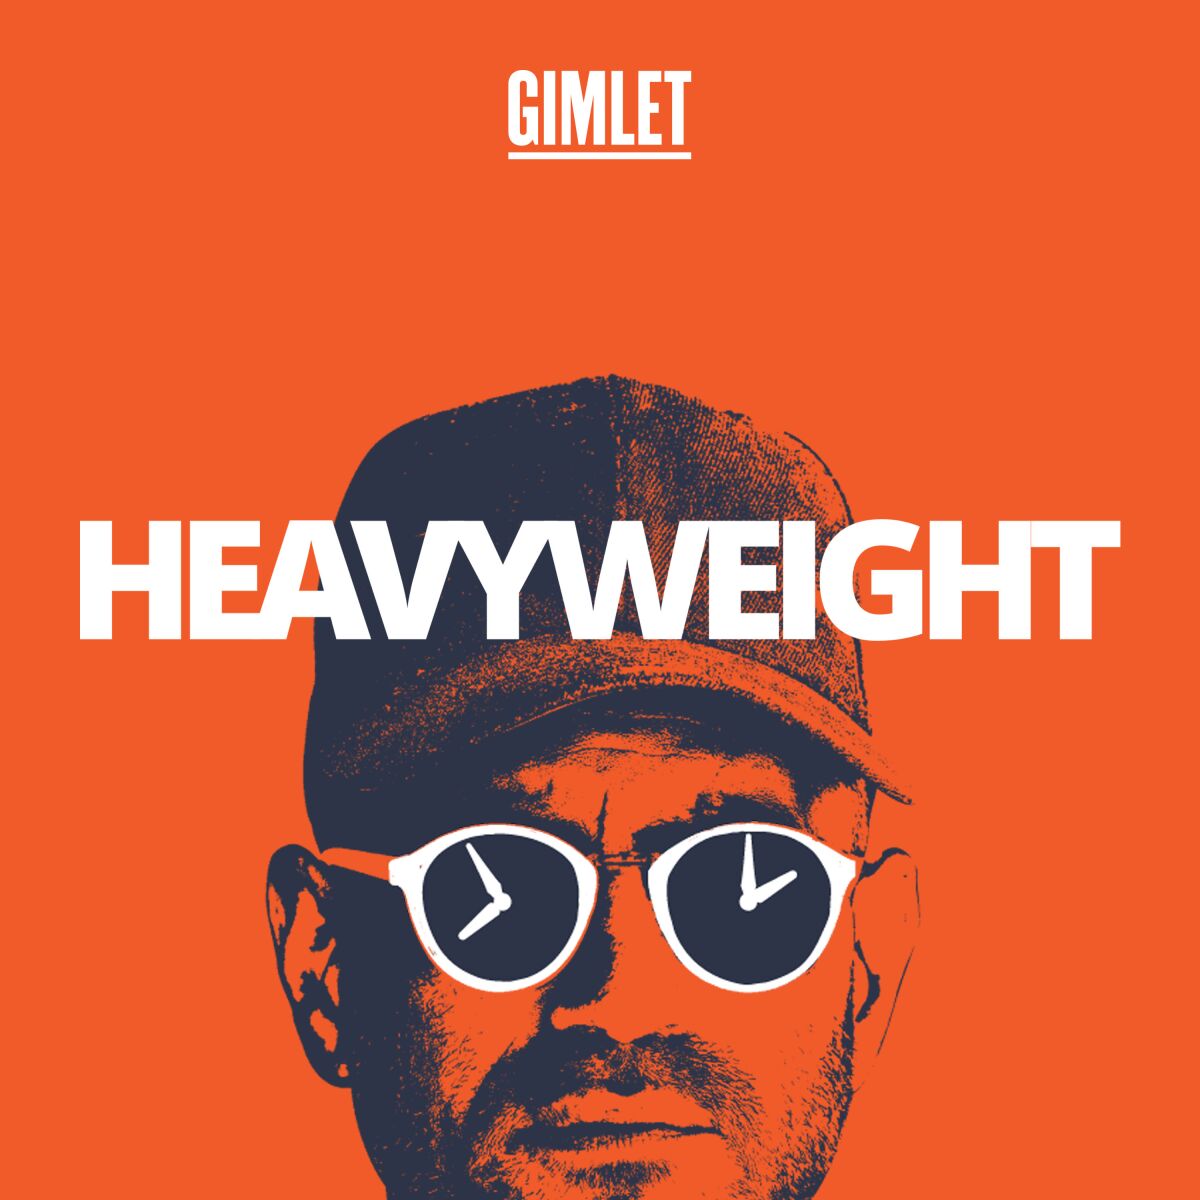 "Heavyweight" is a podcast hosted by Jonathan Goldstein.